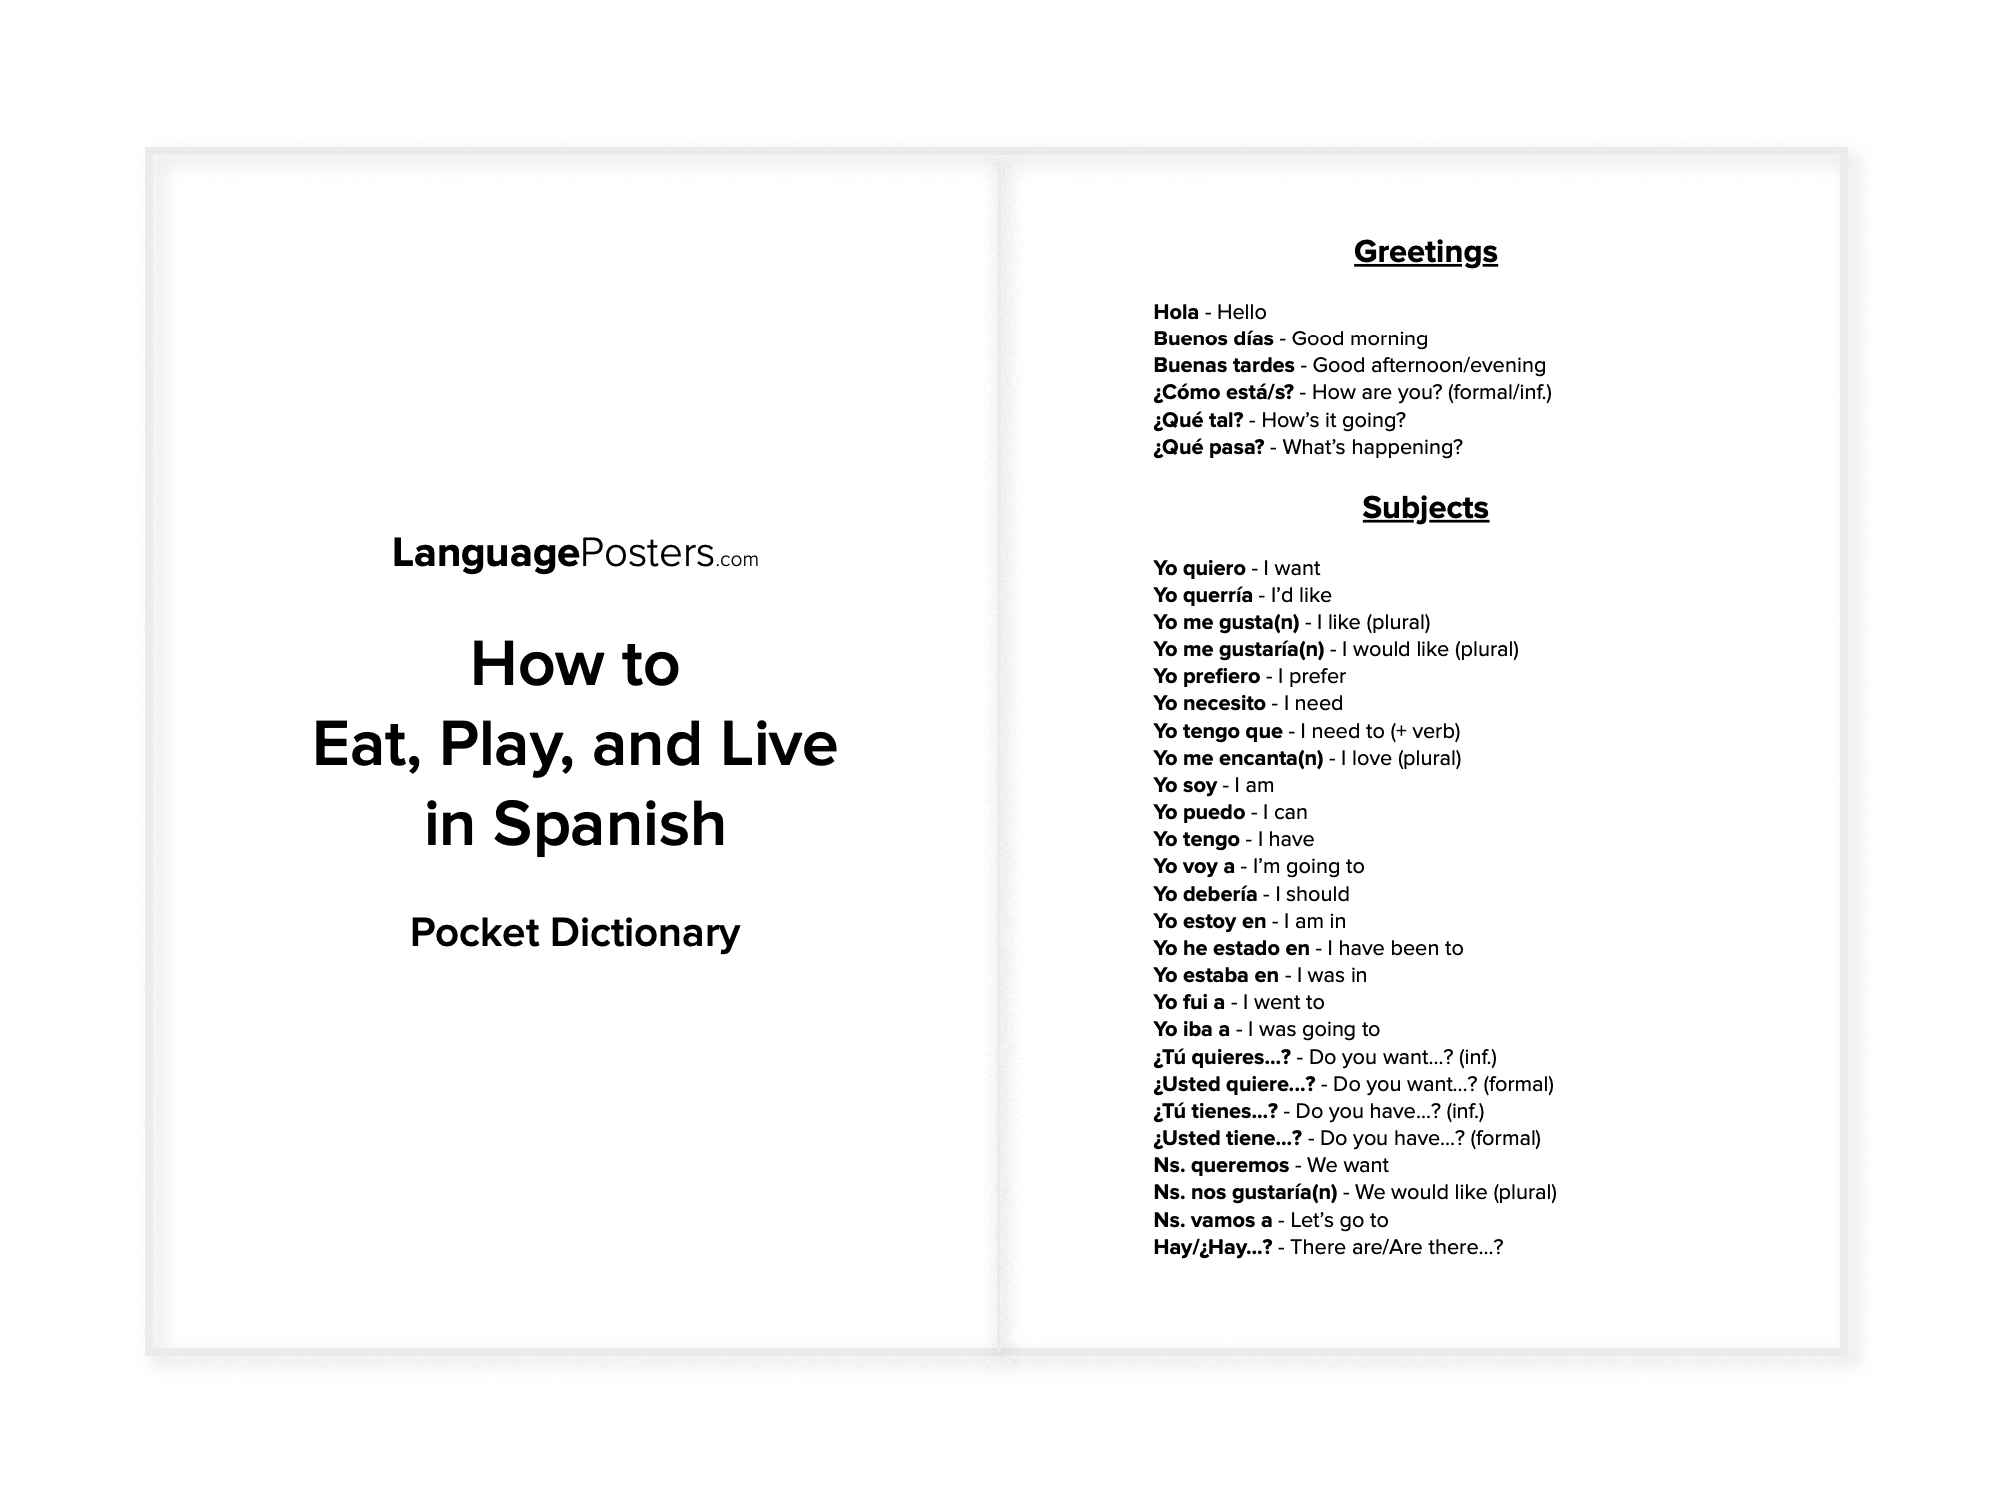 LanguagePosters.com - How to Eat, Play, and Live in Spanish Pocket Dictionary Preview